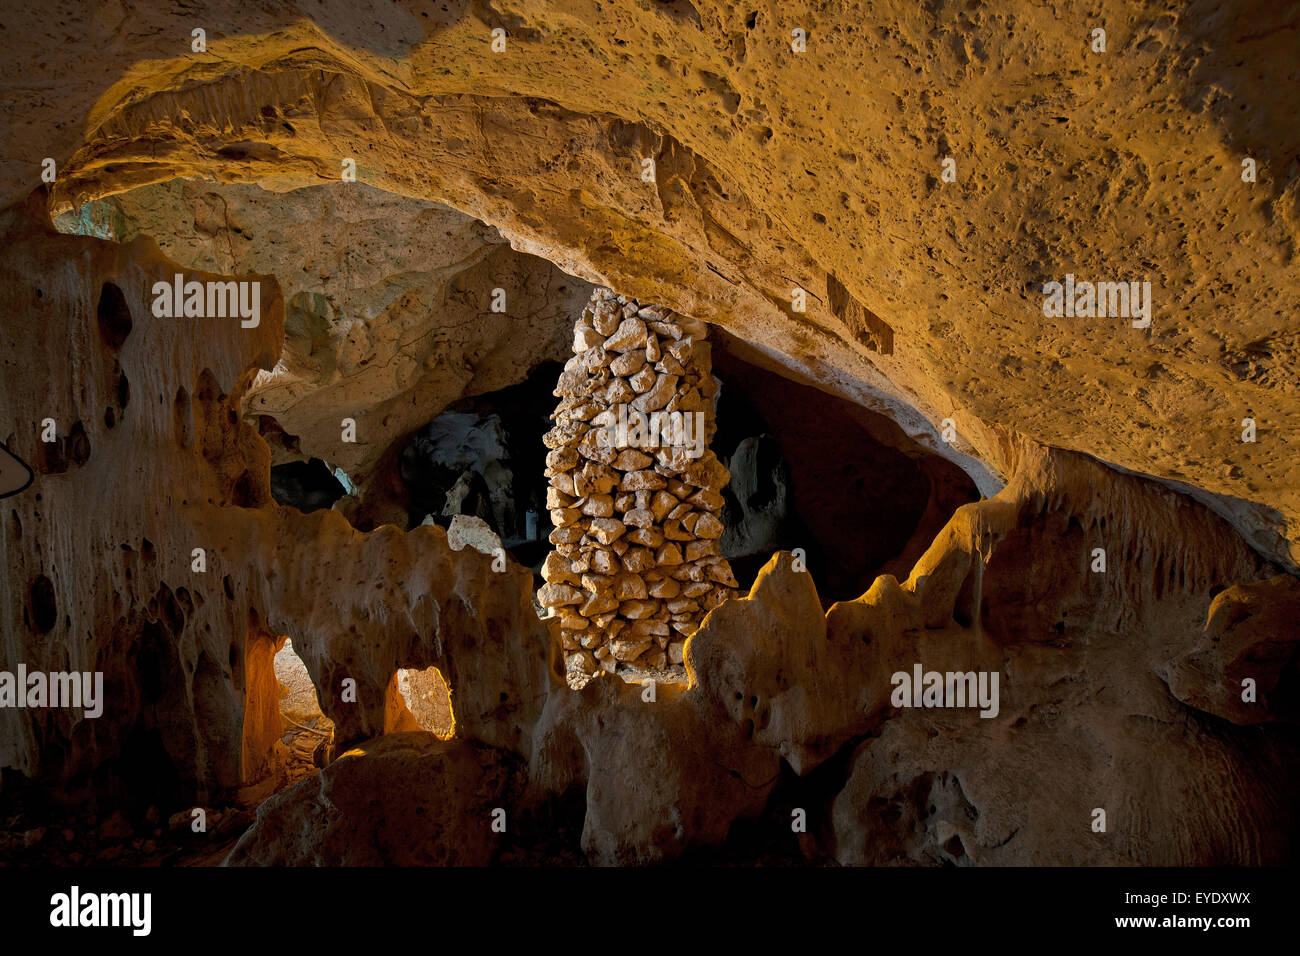 Map of Jamaica rock formation, Green Grotto Caves, Discovery Bay, St. Ann, Jamaica Stock Photo